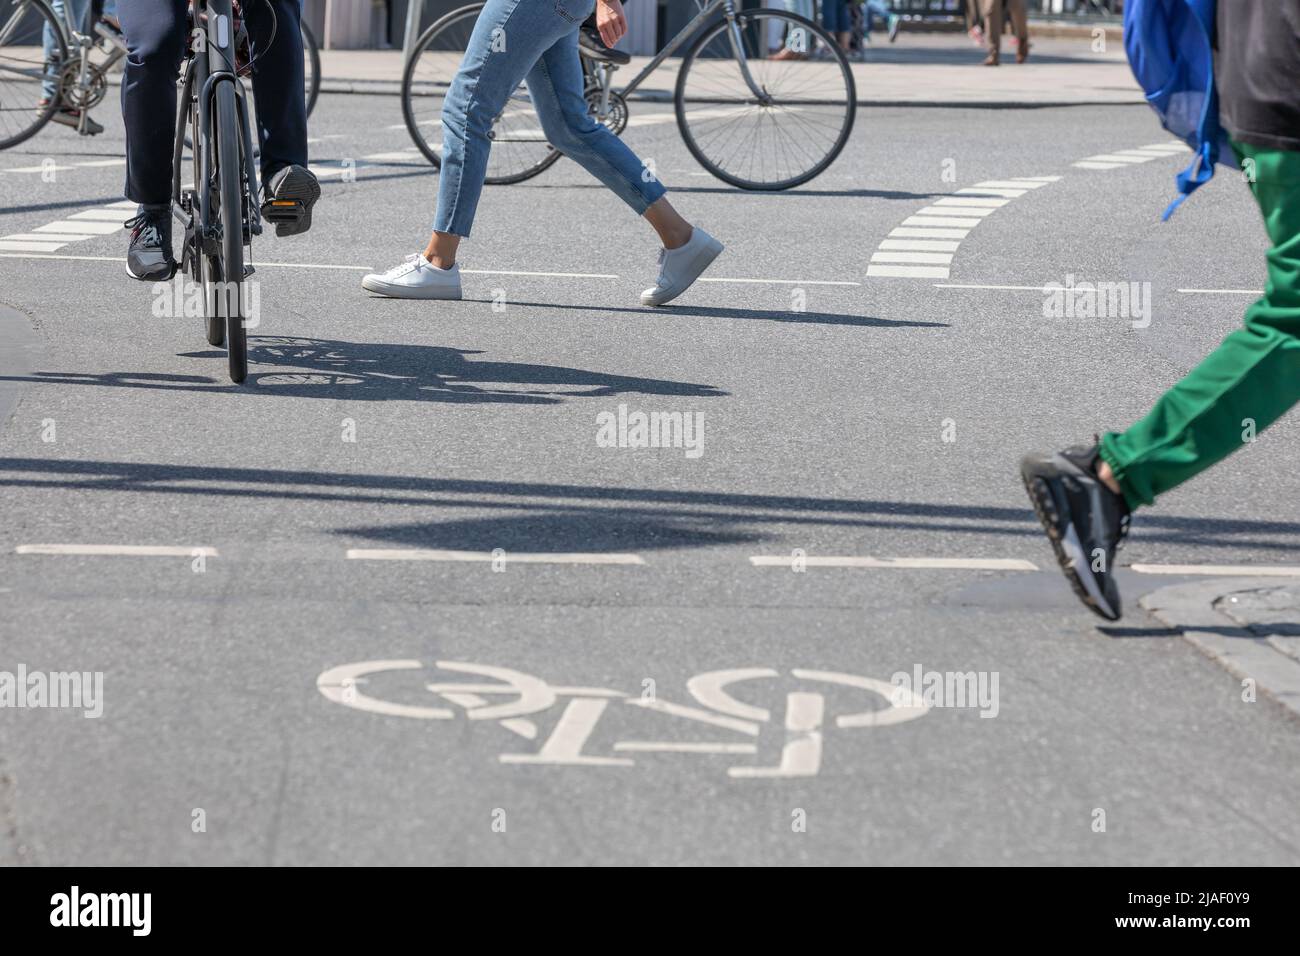 street scene with pedestrians and cyclists Stock Photo